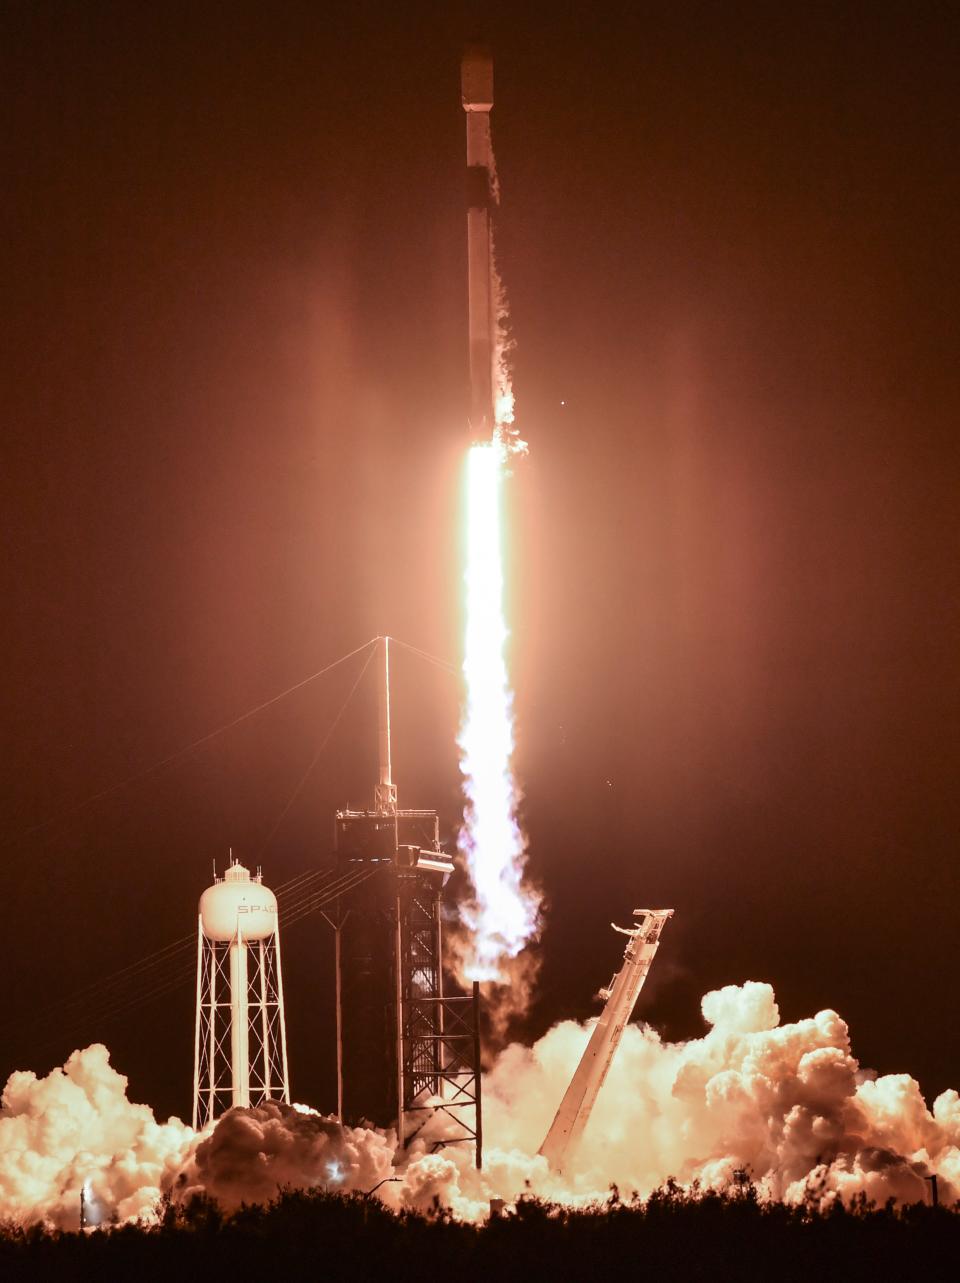 A SpaceX Falcon 9 rocket lifts off Sunday night from pad 39A at Kennedy Space Center.